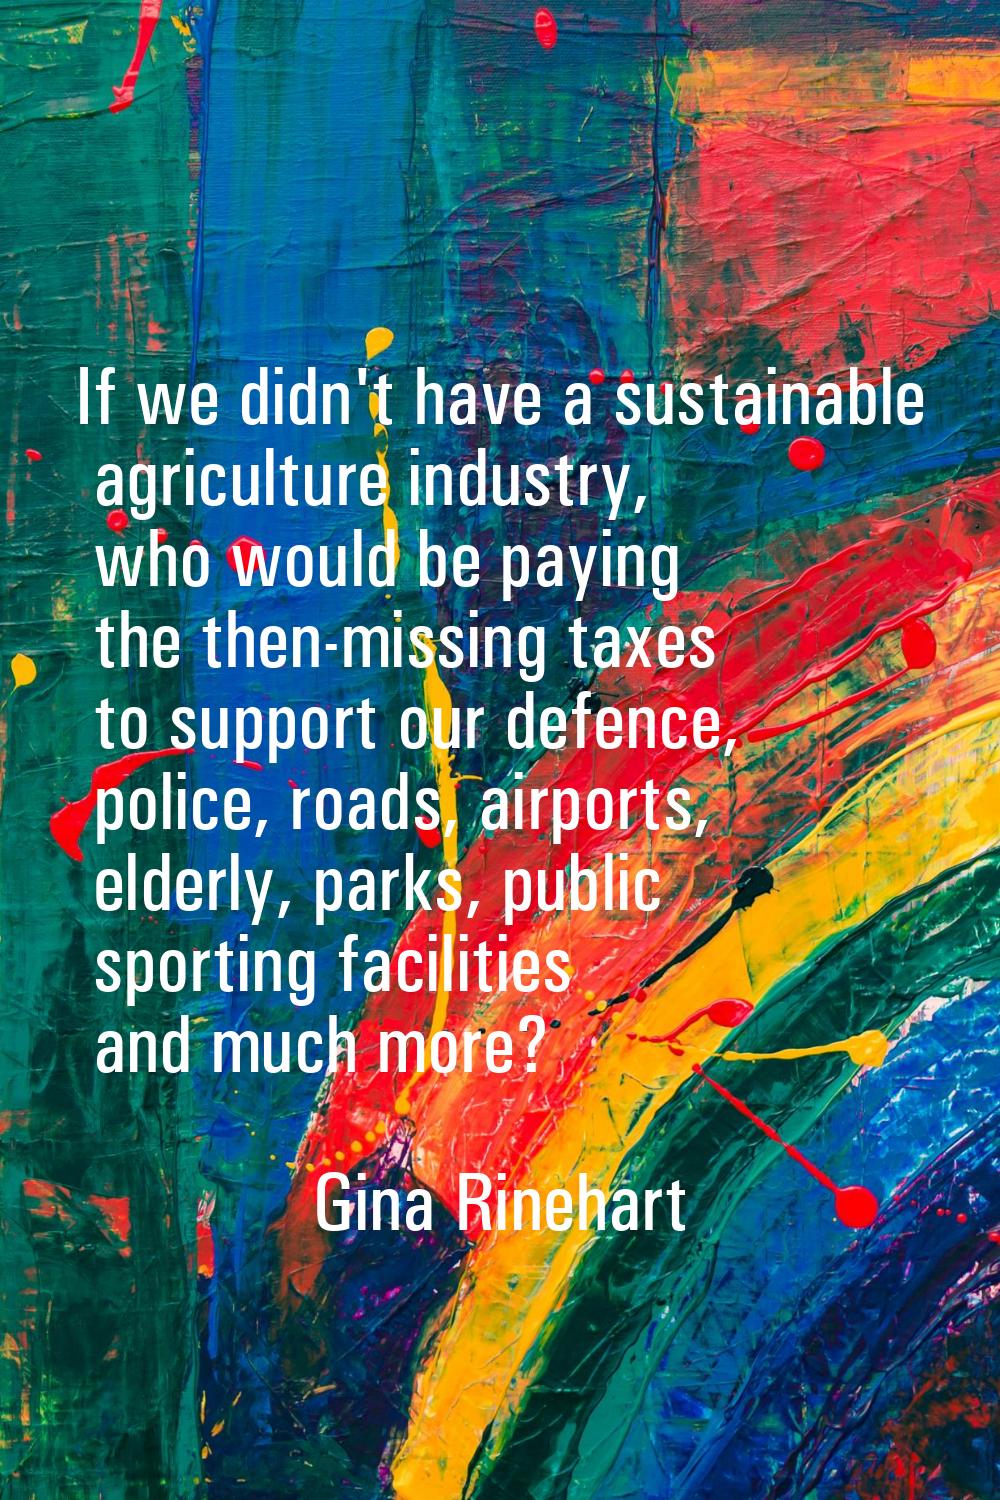 If we didn't have a sustainable agriculture industry, who would be paying the then-missing taxes to